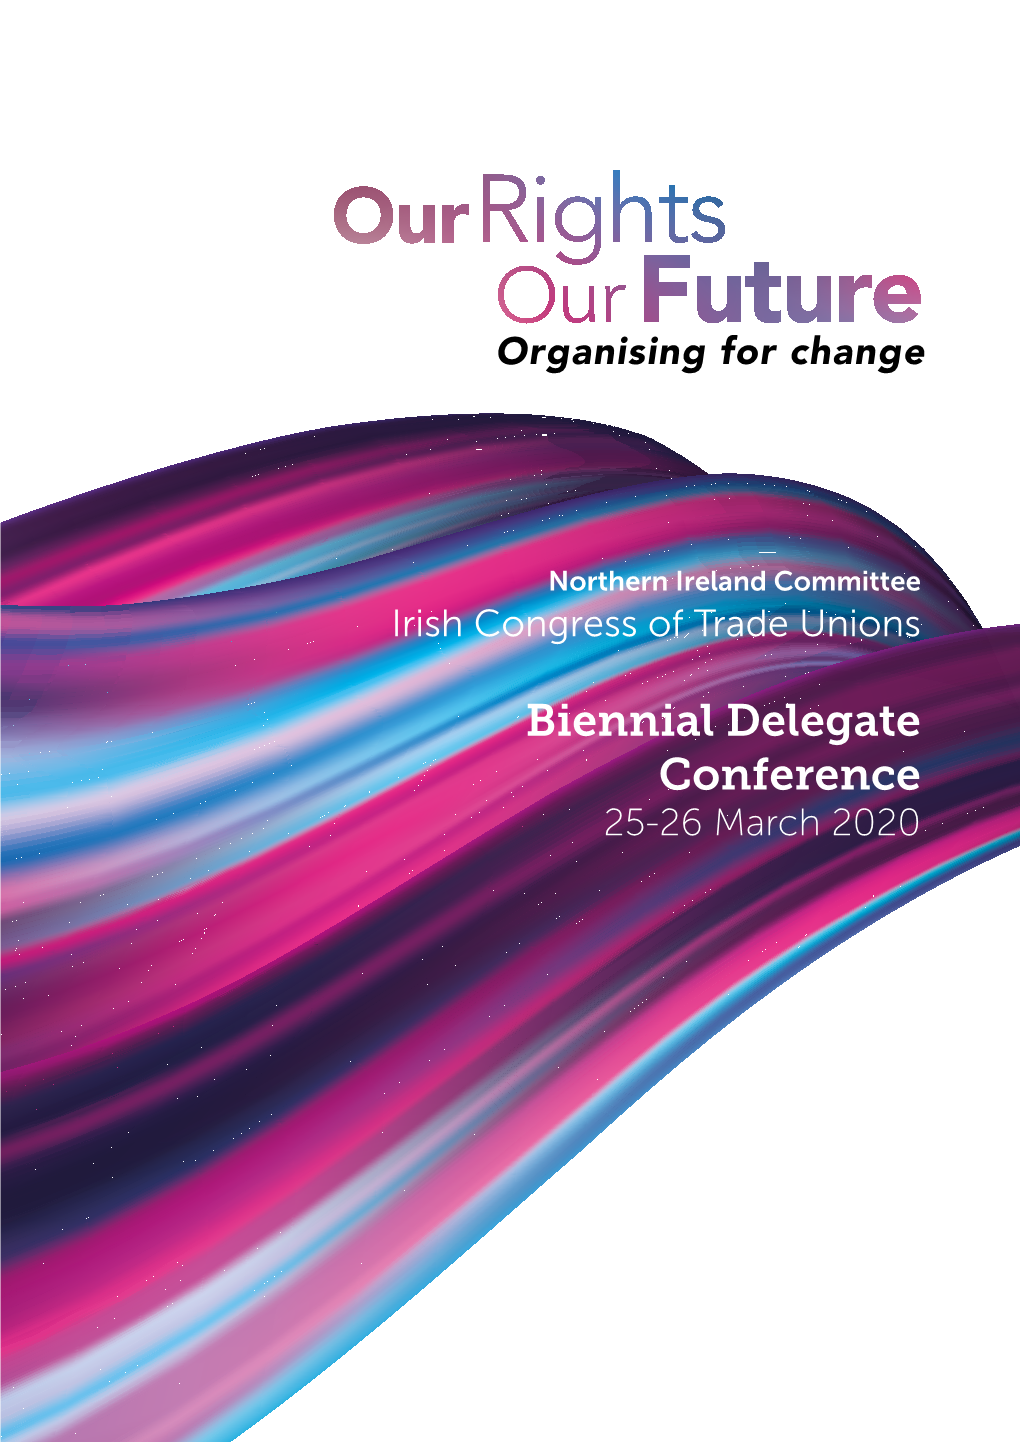 Biennial Delegate Conference 25-26 March 2020